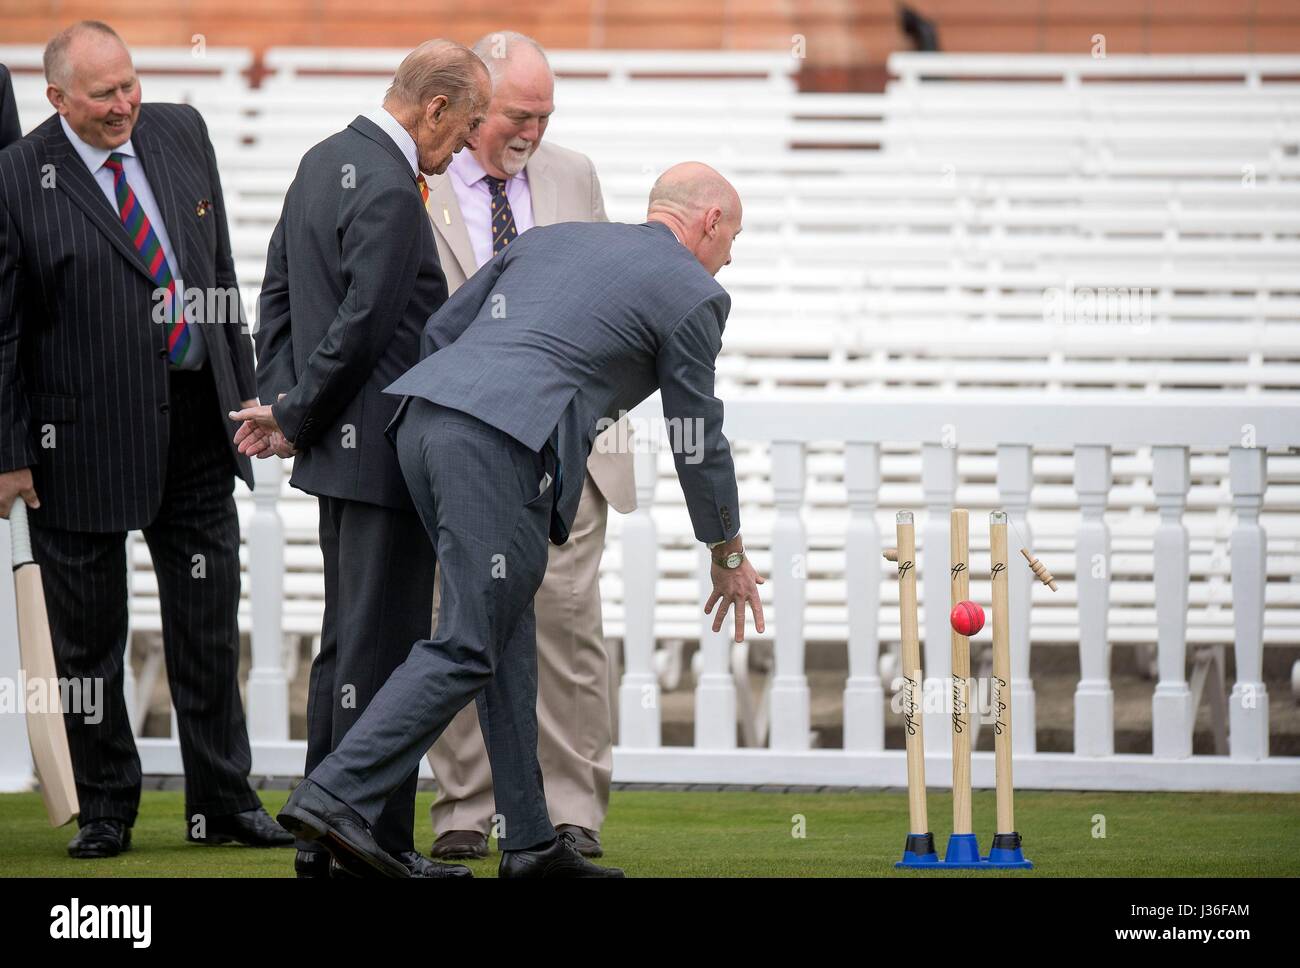 RETRANSMITTING CORRECTING NAME FROM JOHN STEPHENSON TO FRASER STEWART (Left-right) Graham Monkhouse, the Duke of Edinburgh and Mike Gatting watch as Marylebone Cricket Club's Laws of Cricket Manager Fraser Stewart (right) bowls towards self retracting bails at Lord's Cricket Ground in London. Stock Photo